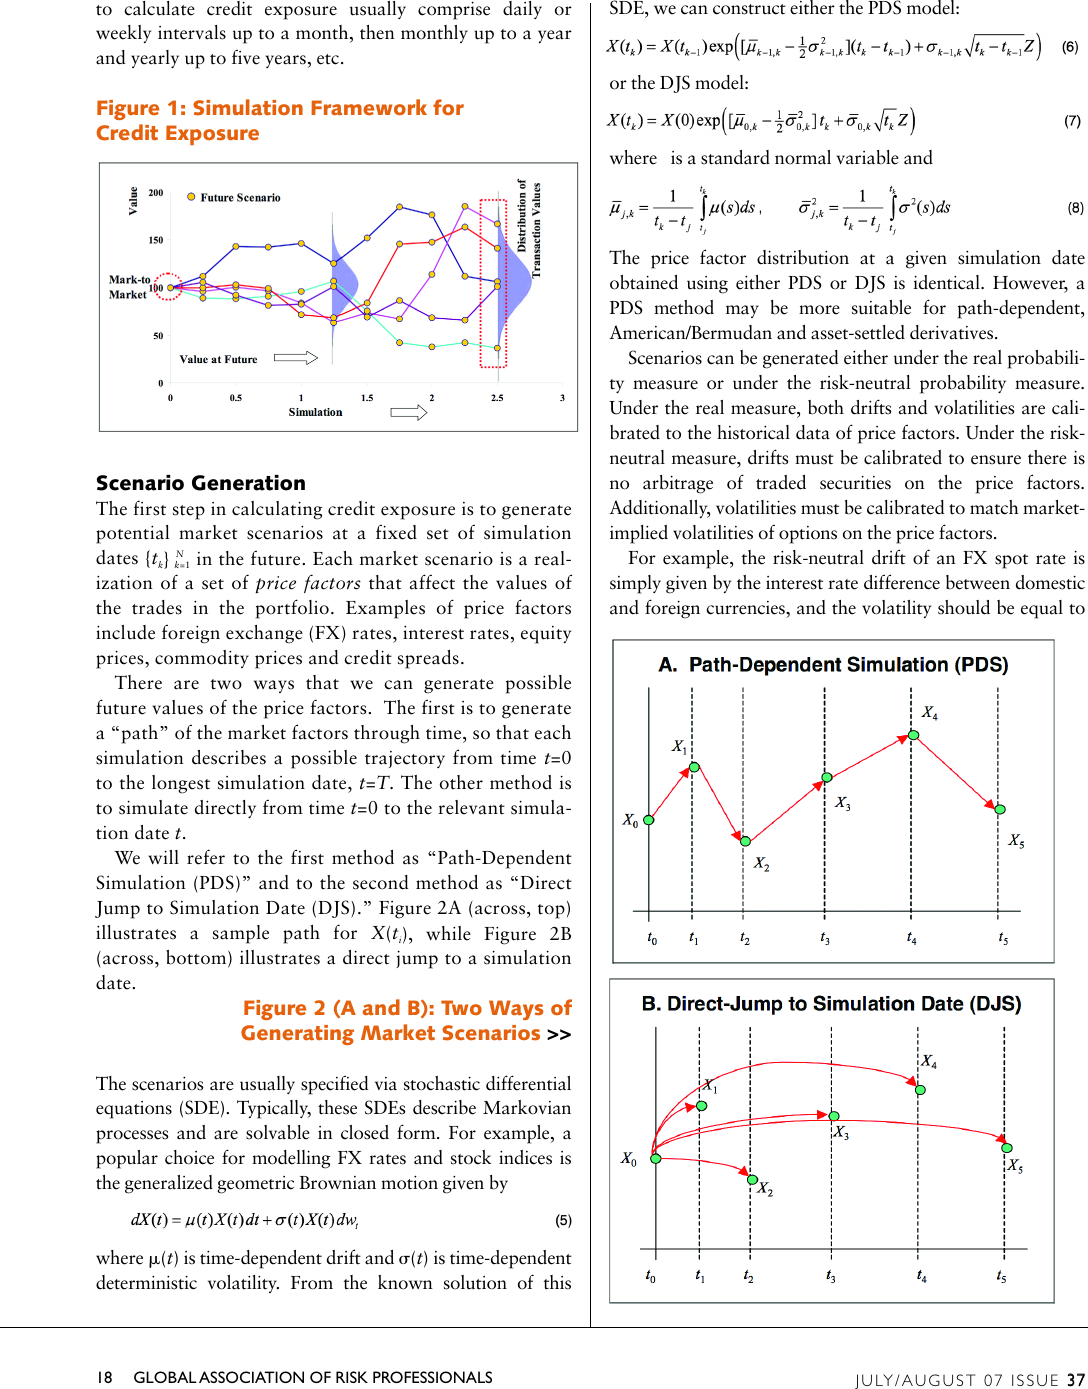 Page 3 of 7 - 16_CoverStory_ Pykhtin, Zhu - 2007 A Guide To Ling Counterparty Credit Risk